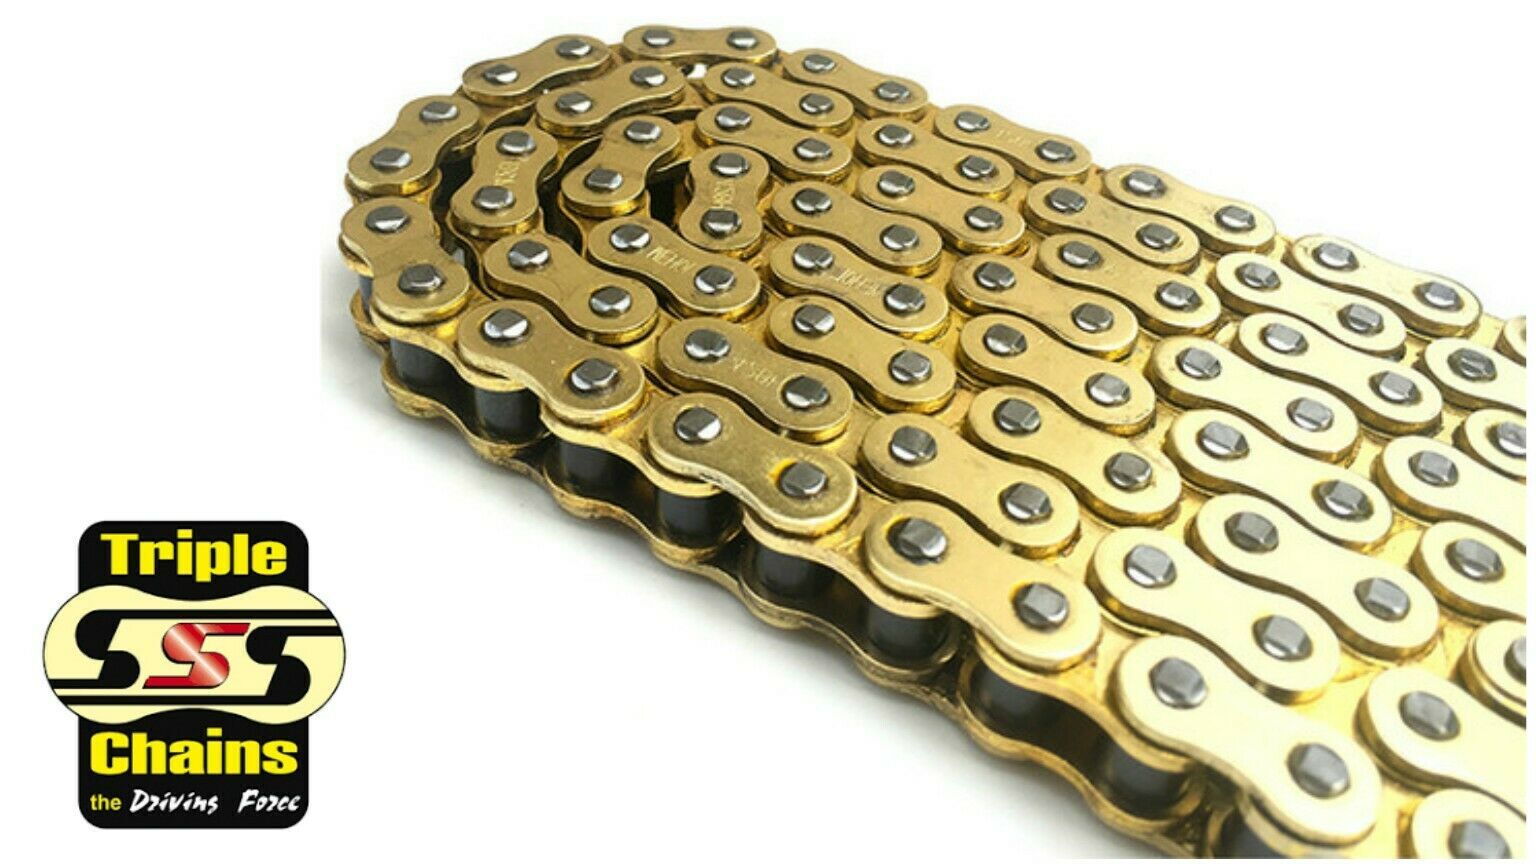 Triple S 530 oring motorcycle chain 114 links road street dirt off road mx gold